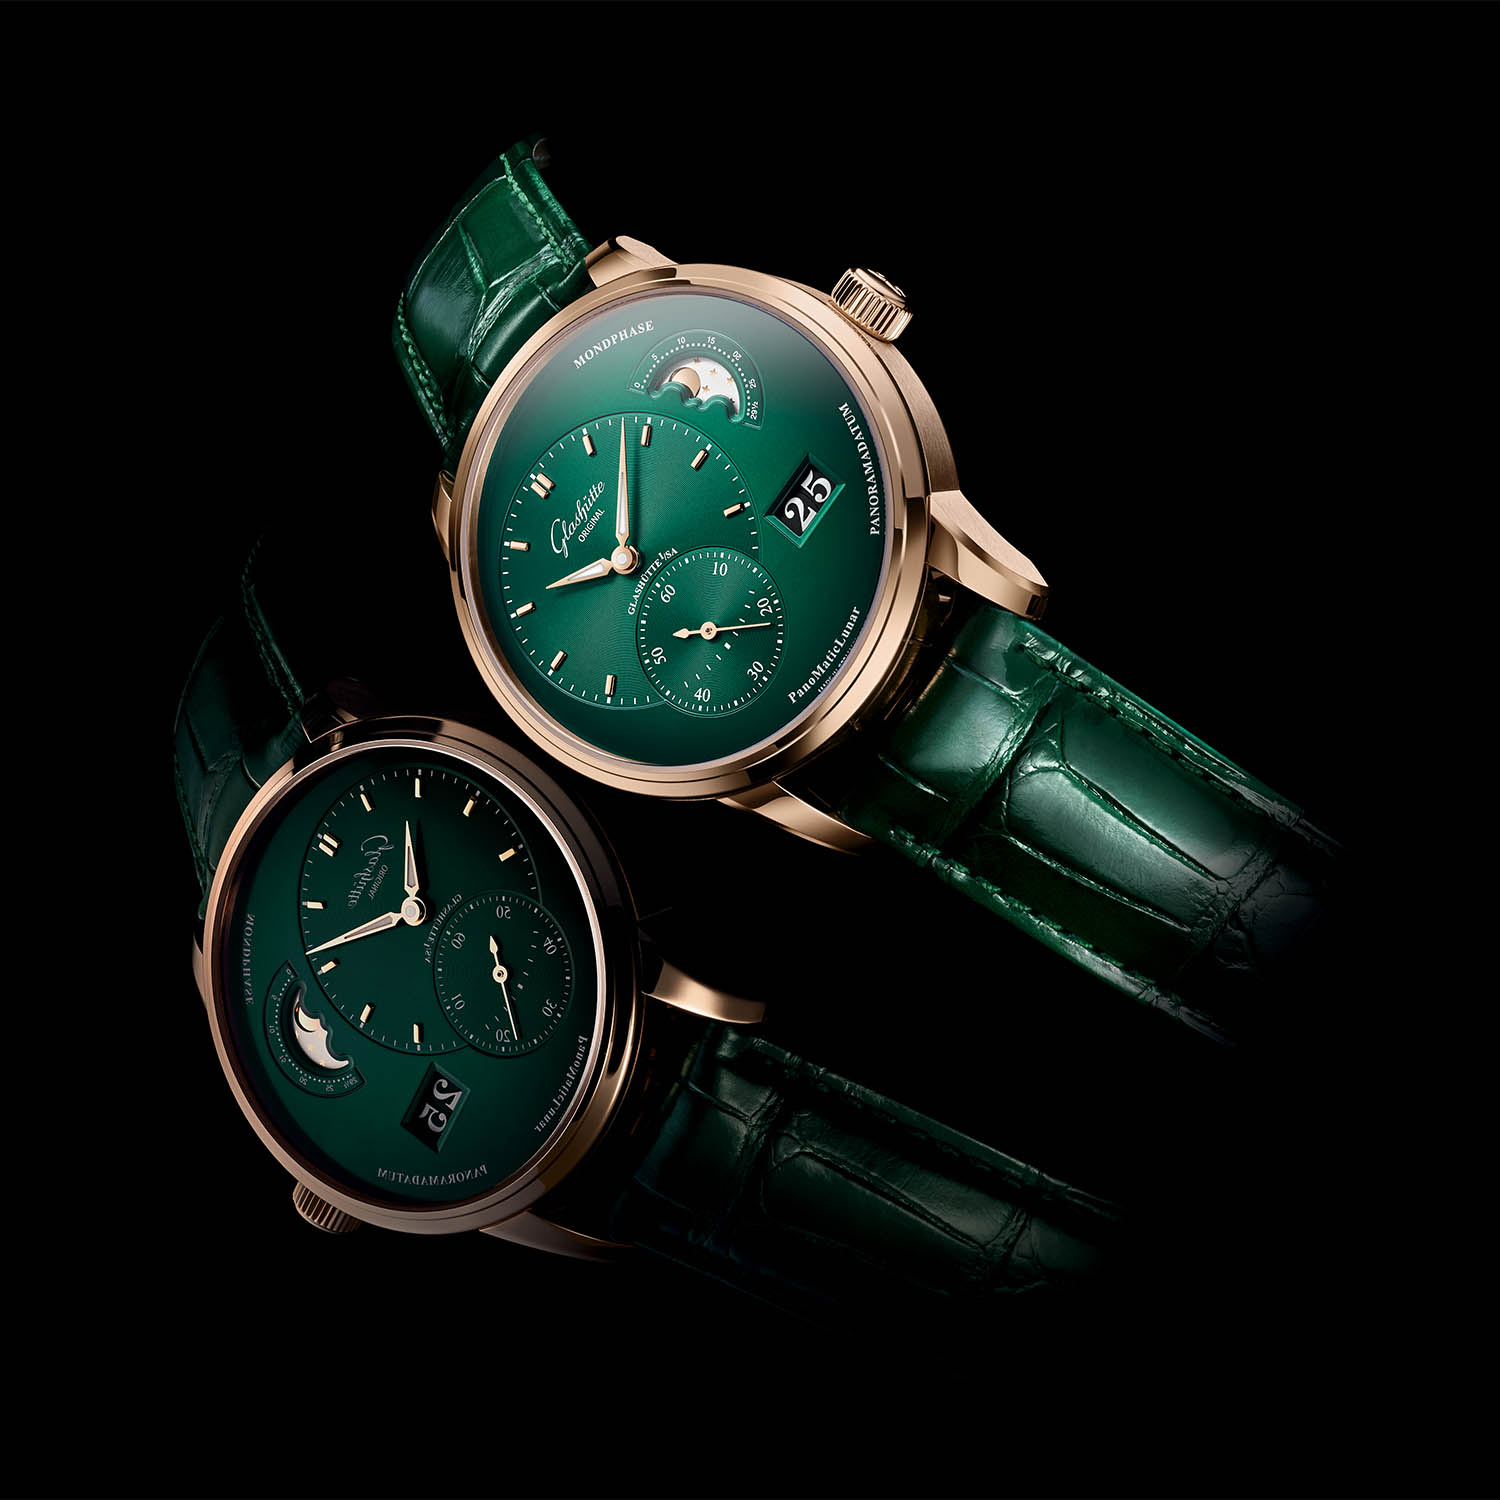 Glashutte Original PanoMaticLunar Red Gold and Green Dial